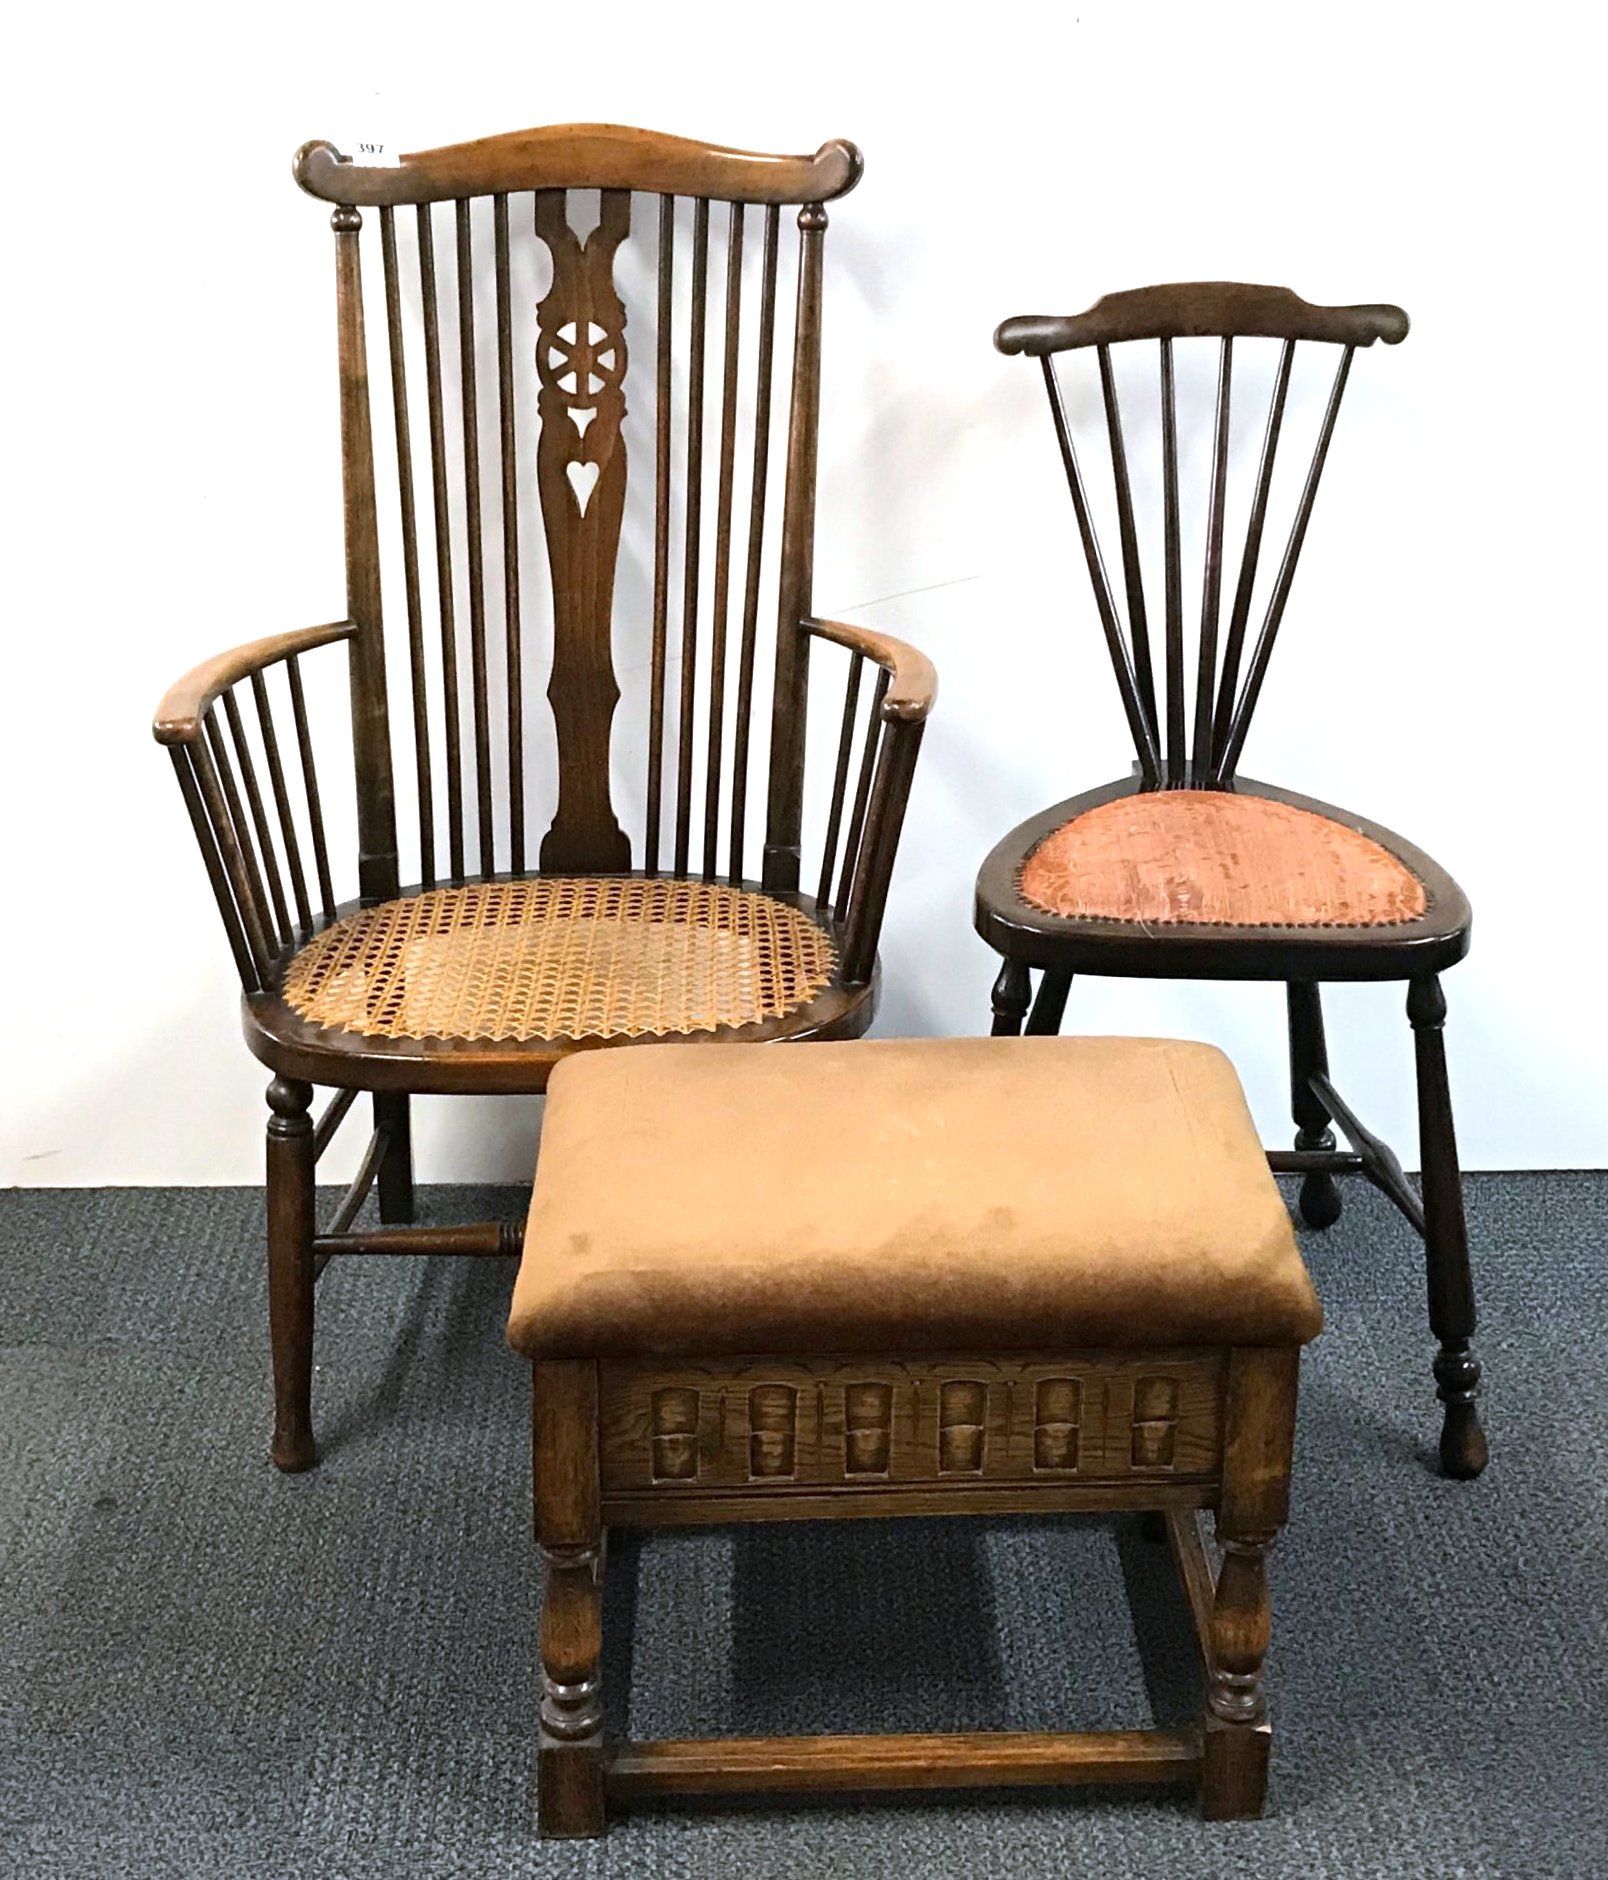 A lovely cane seated Arts and Crafts chair together with a further Arts and Crafts chair and an